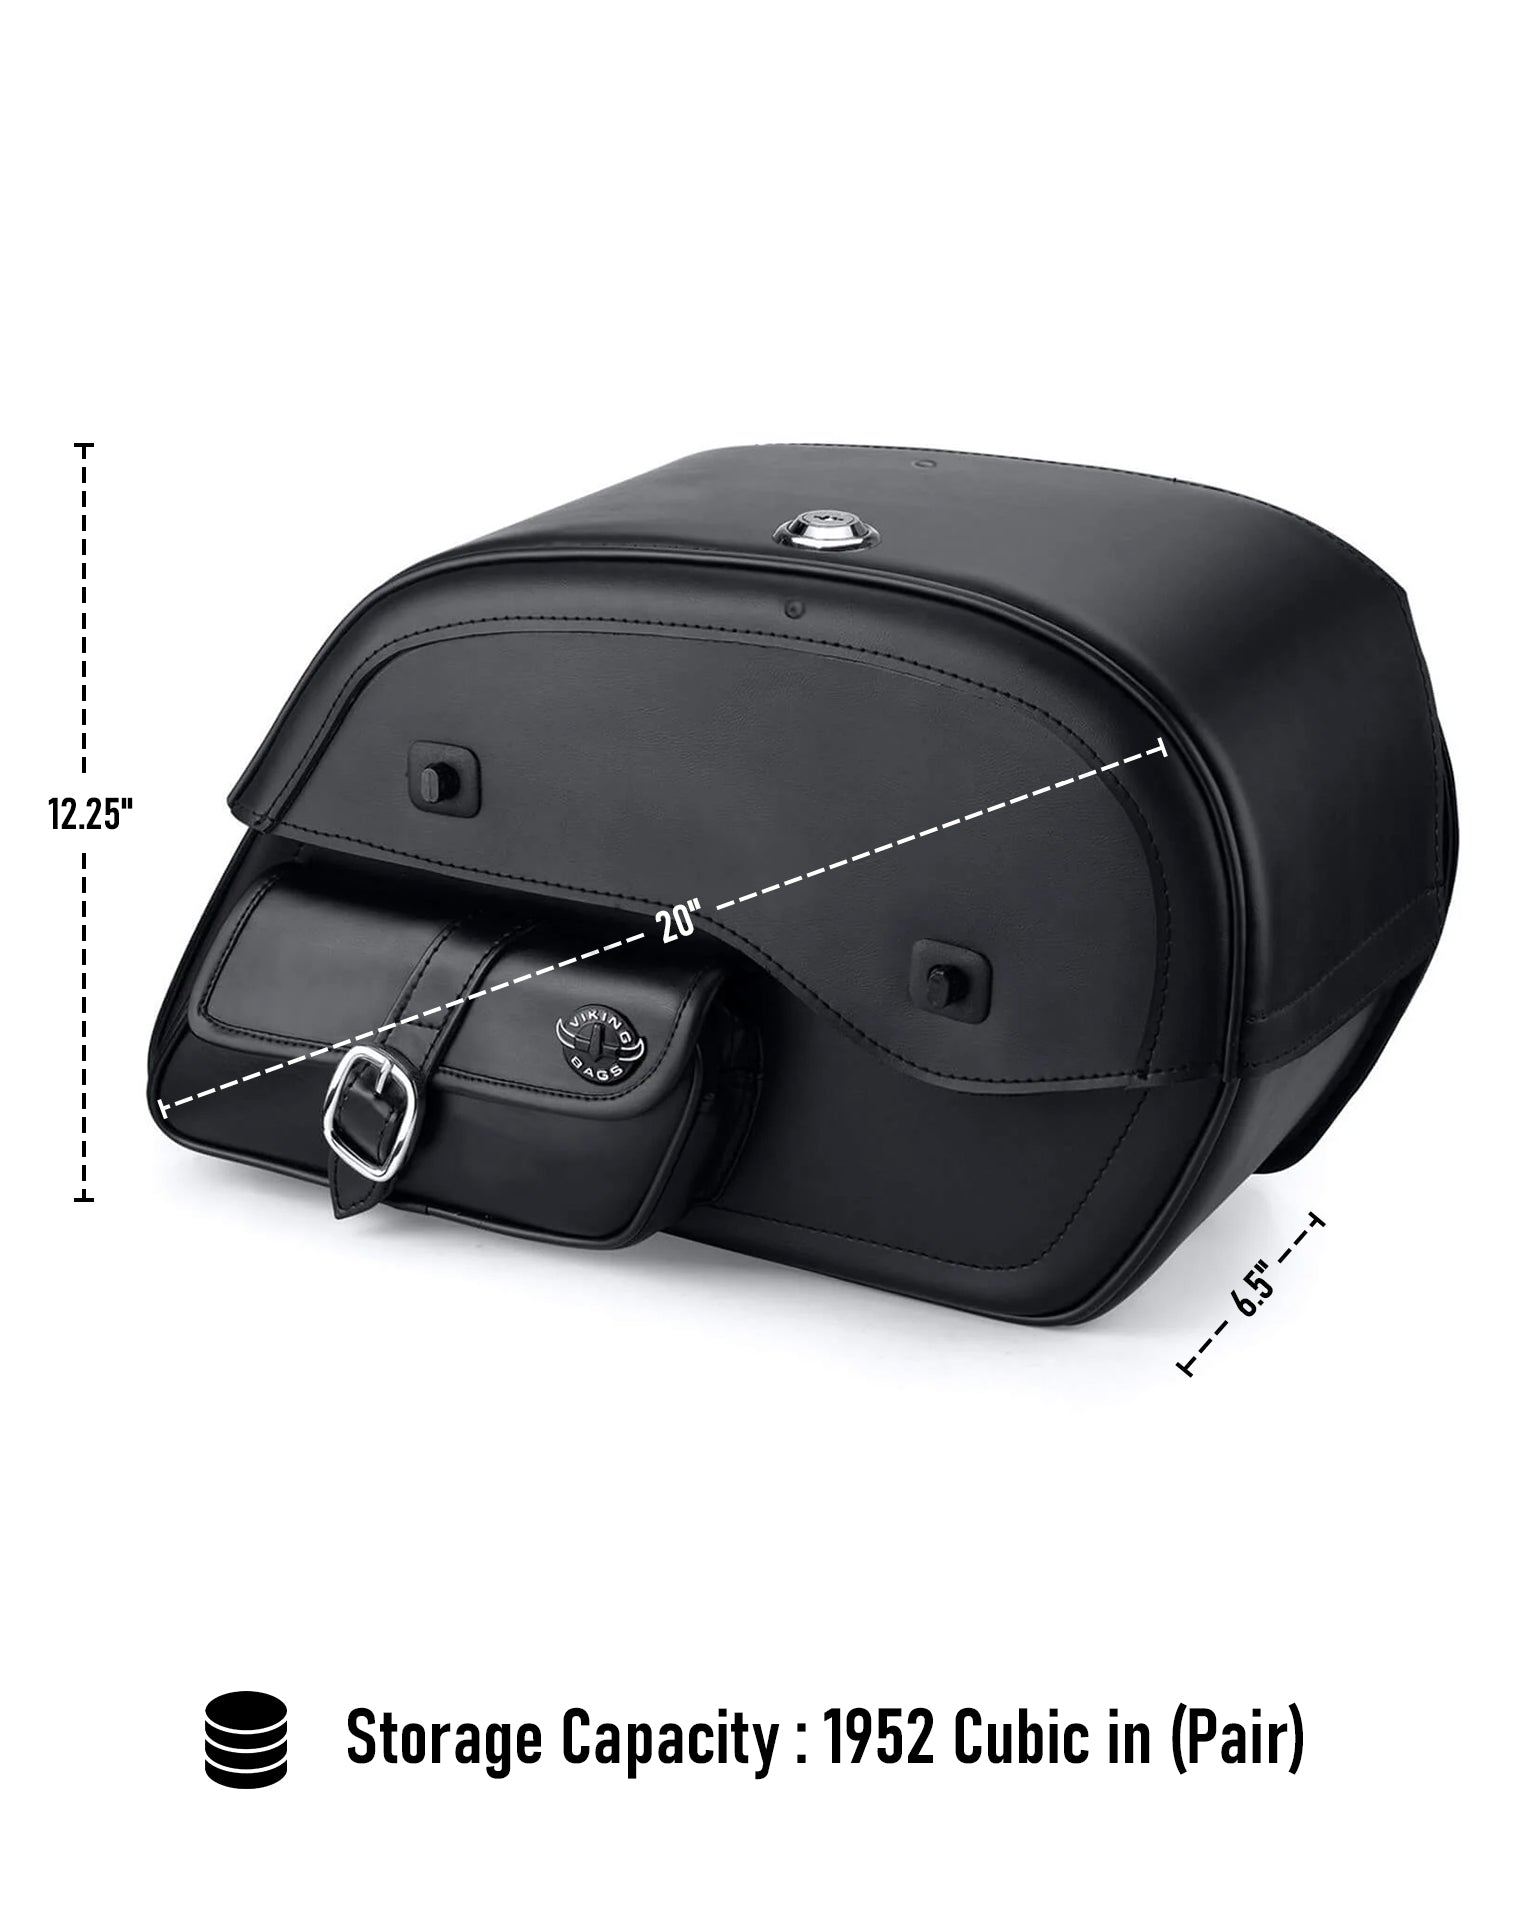 Viking Essential Side Pocket Large Honda Valkyrie 1500 Tourer Leather Motorcycle Saddlebags Can Store Your Ridings Gears